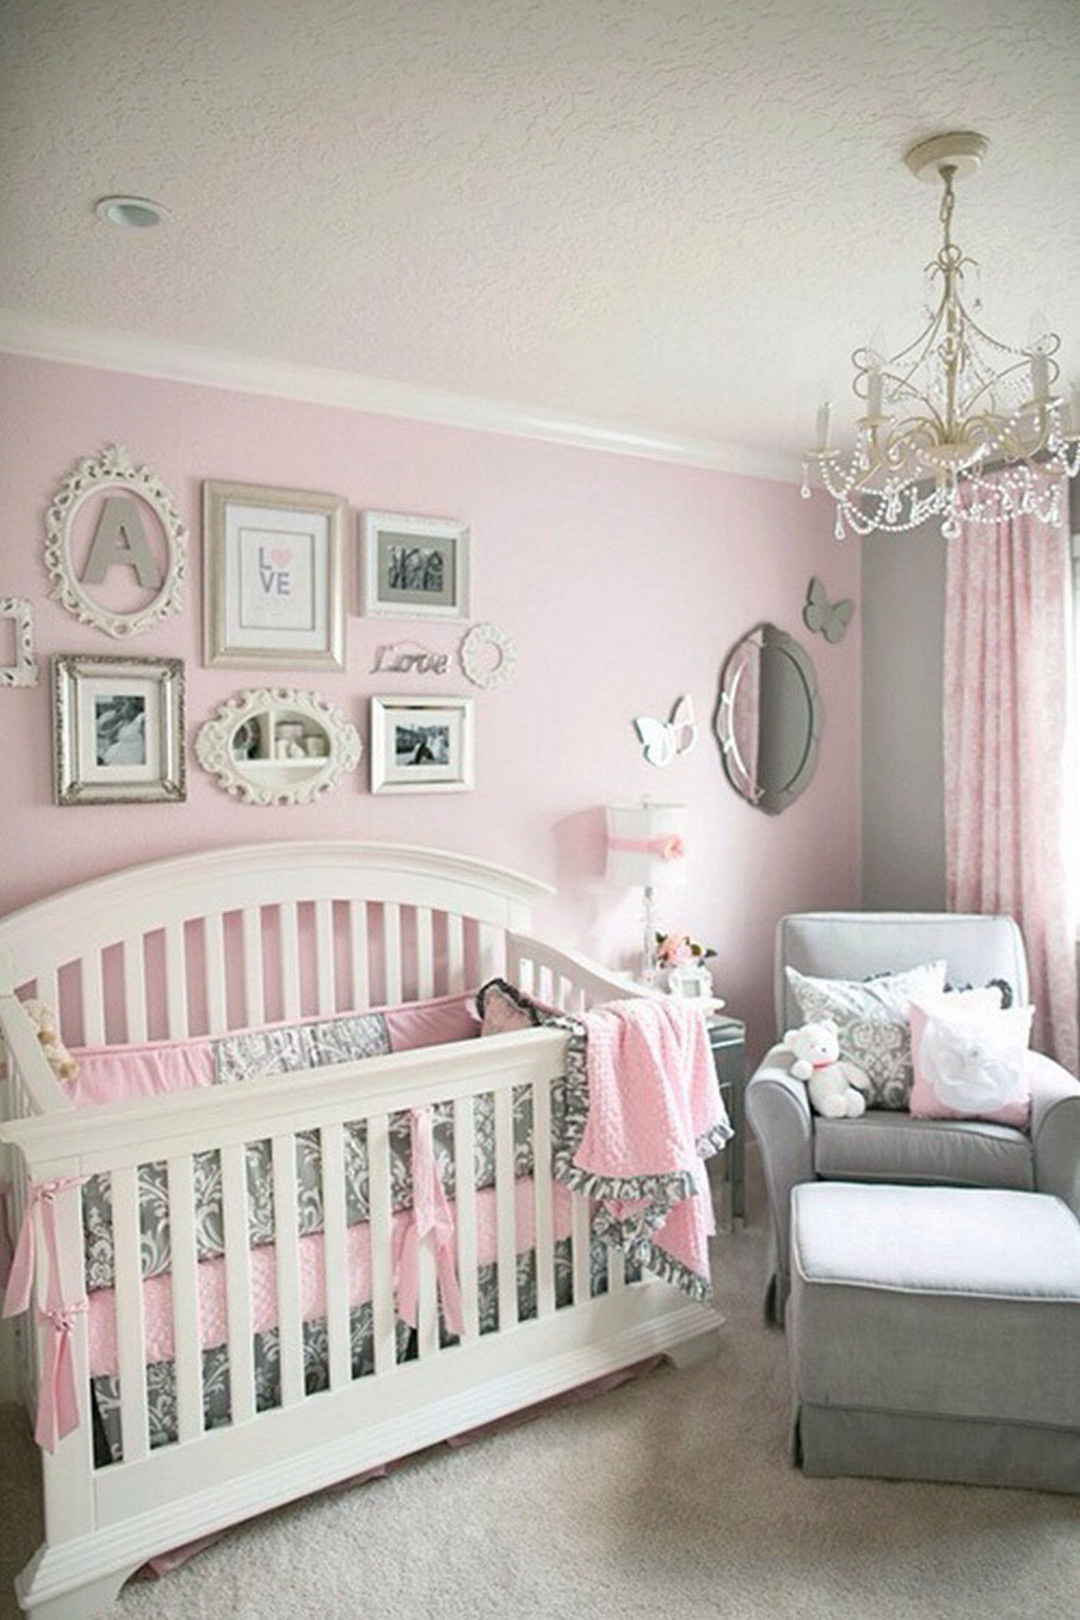 D.I.Y Baby Girl Room Decorations
 6 Actionable Tips on Baby Girl Nursery